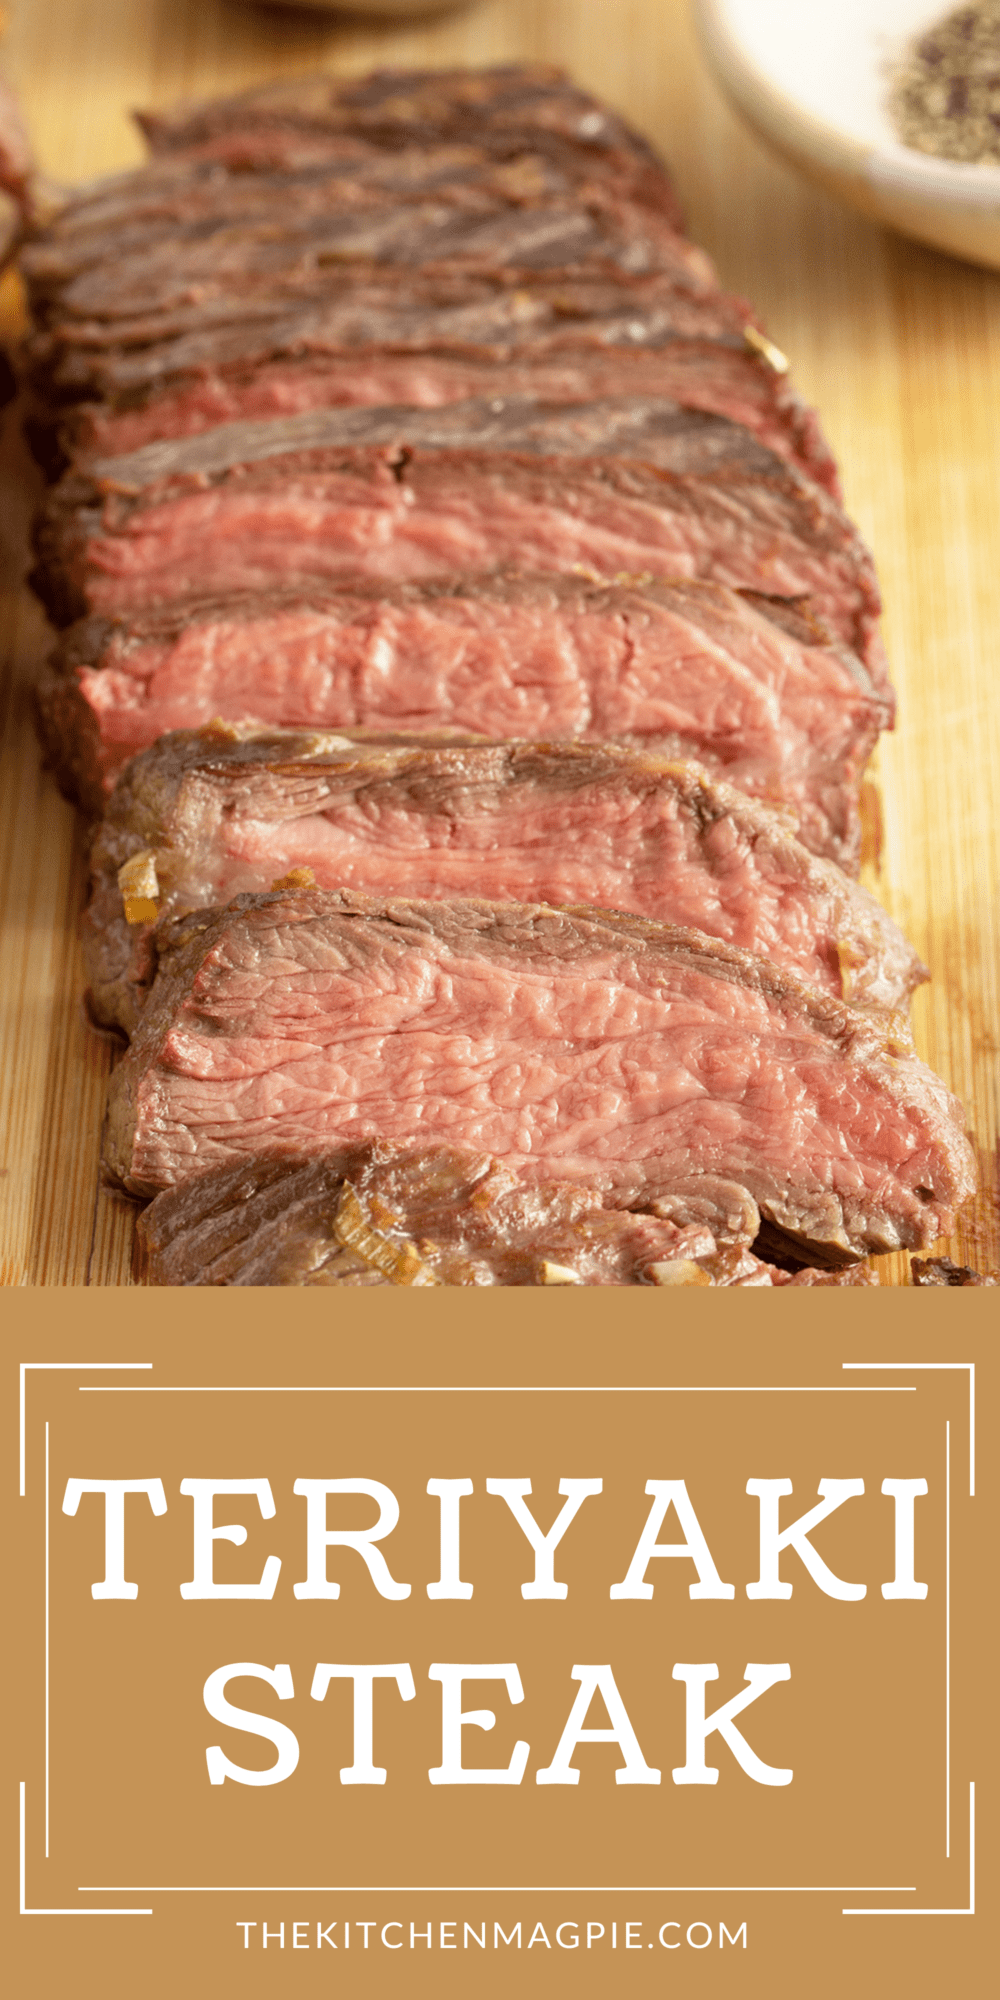 Adding a ton of savory delicious flavor to an already delicious cut of steak produces something that is perfect when sliced super thin and cooked super hot.